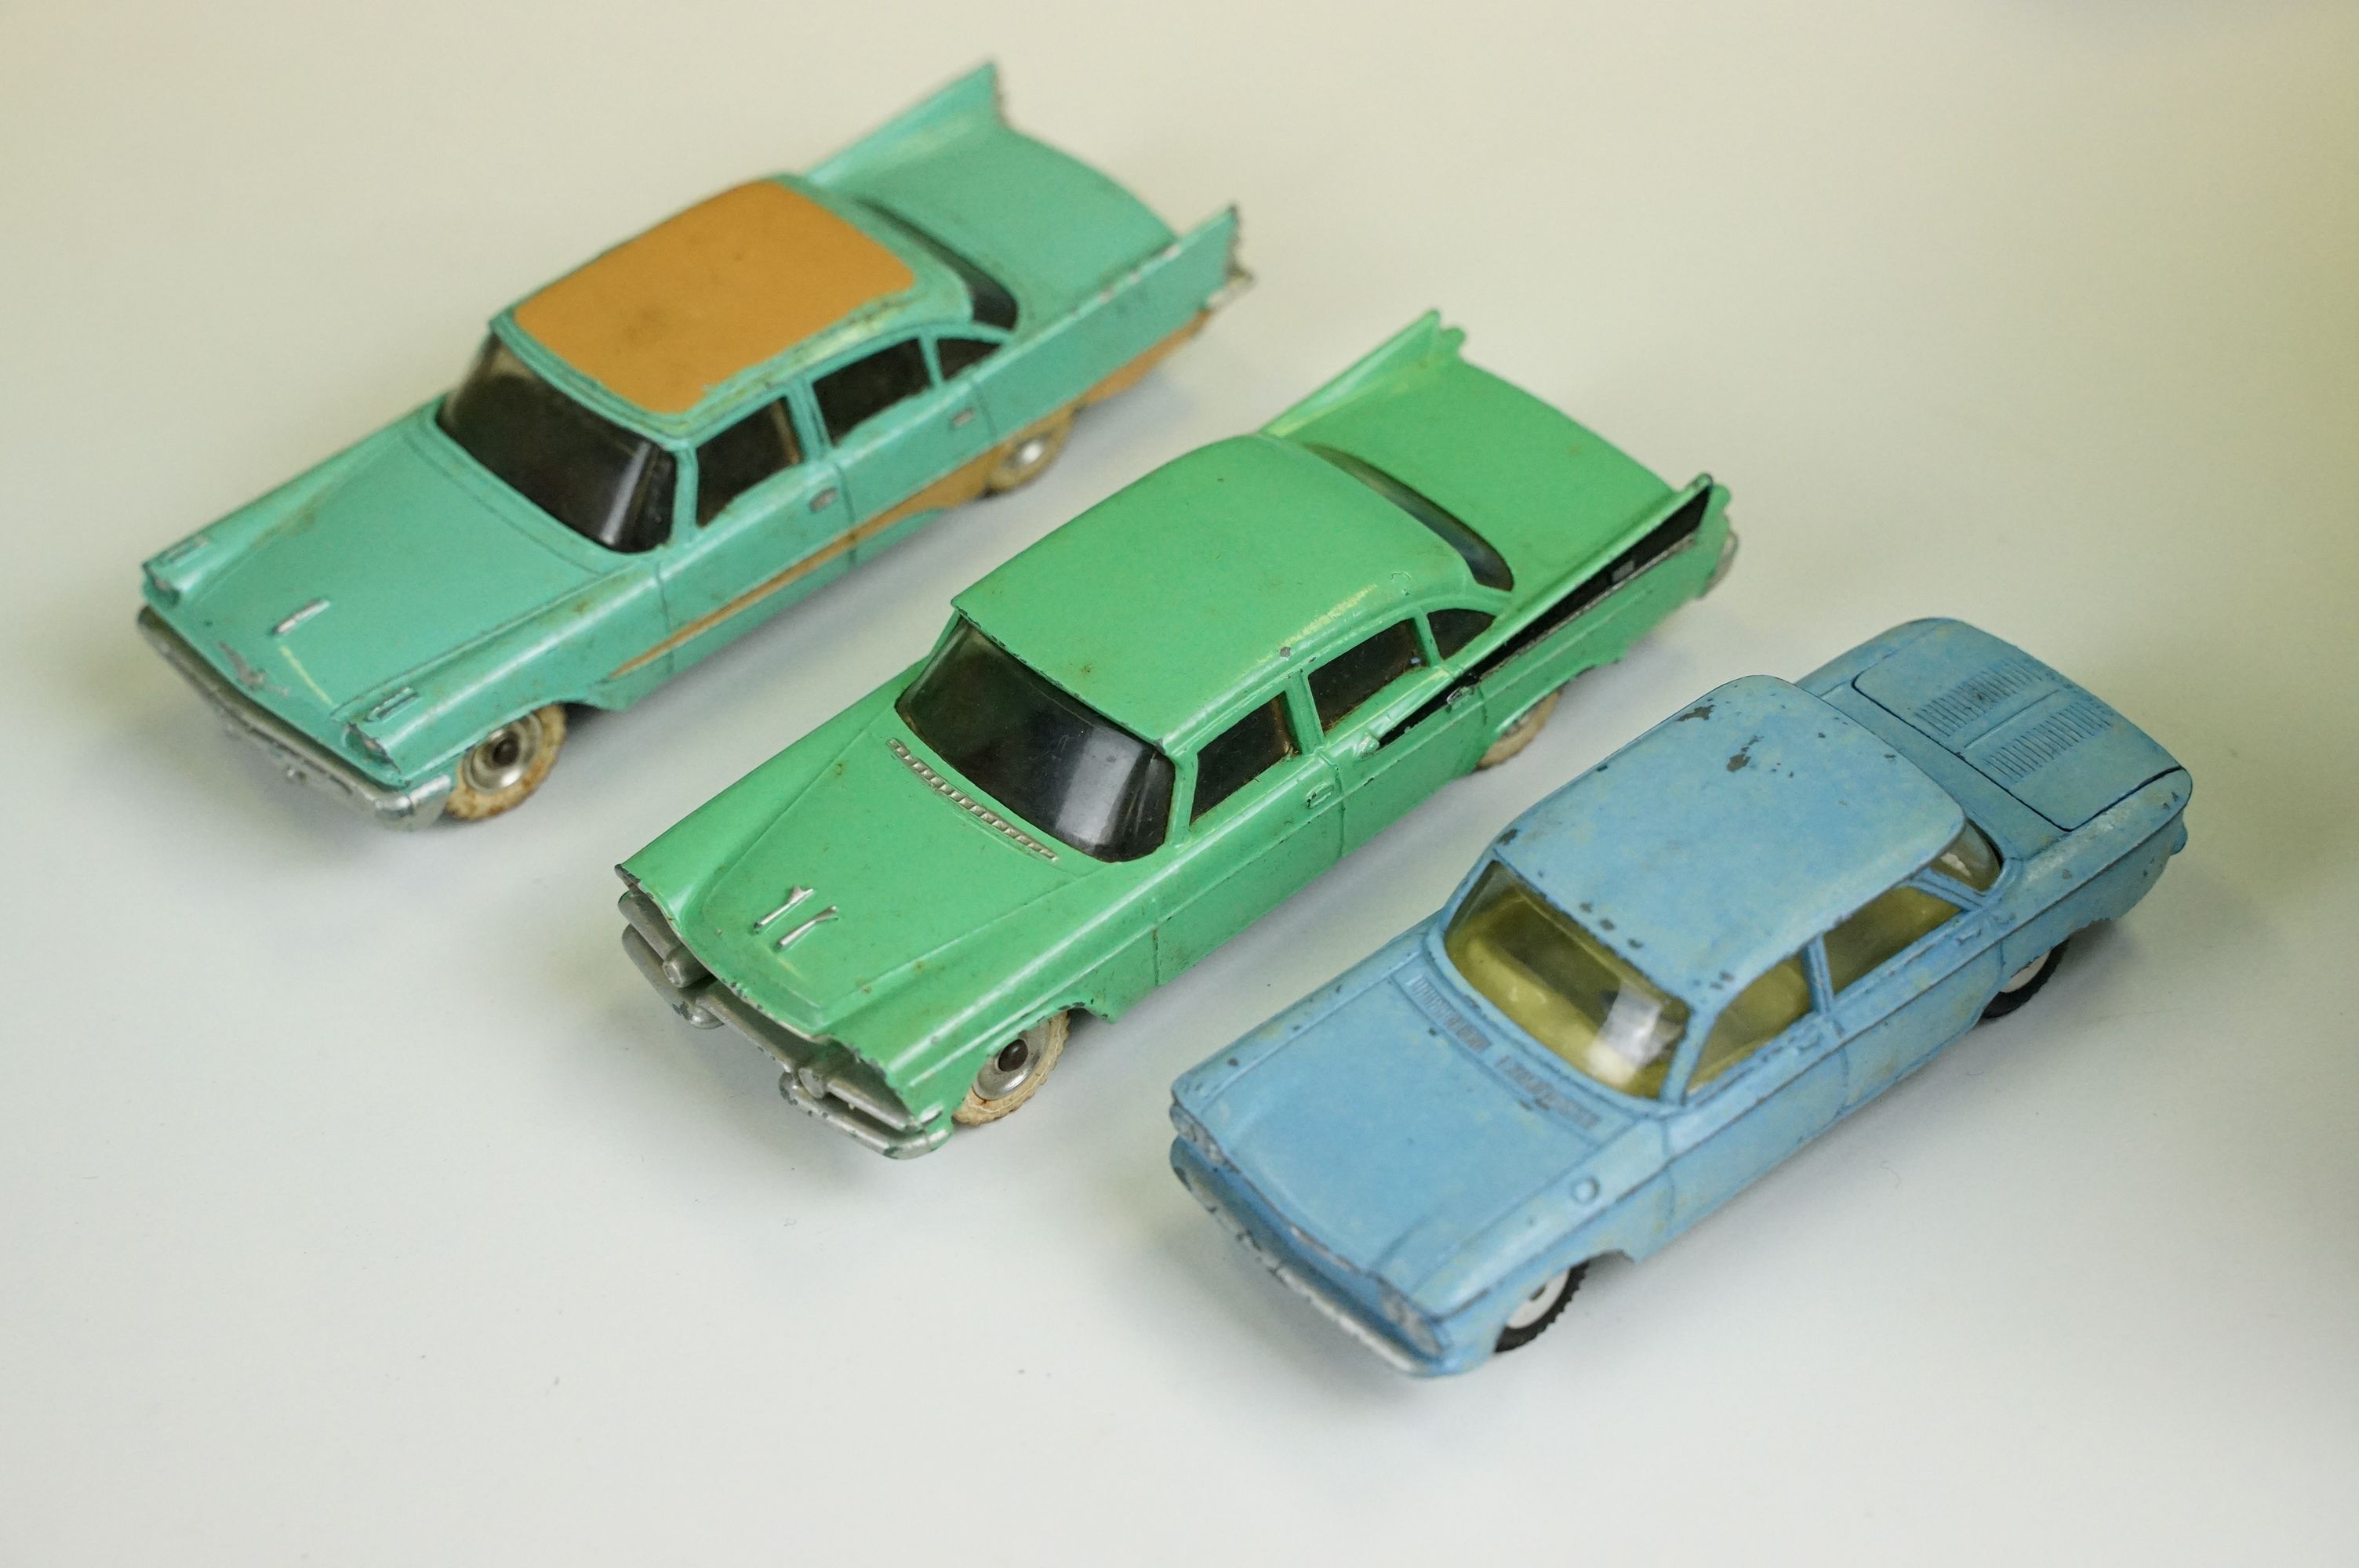 35 Mid 20th C play worn diecast models to include Dinky, Triang & Corgi examples, featuring Triang - Image 11 of 13